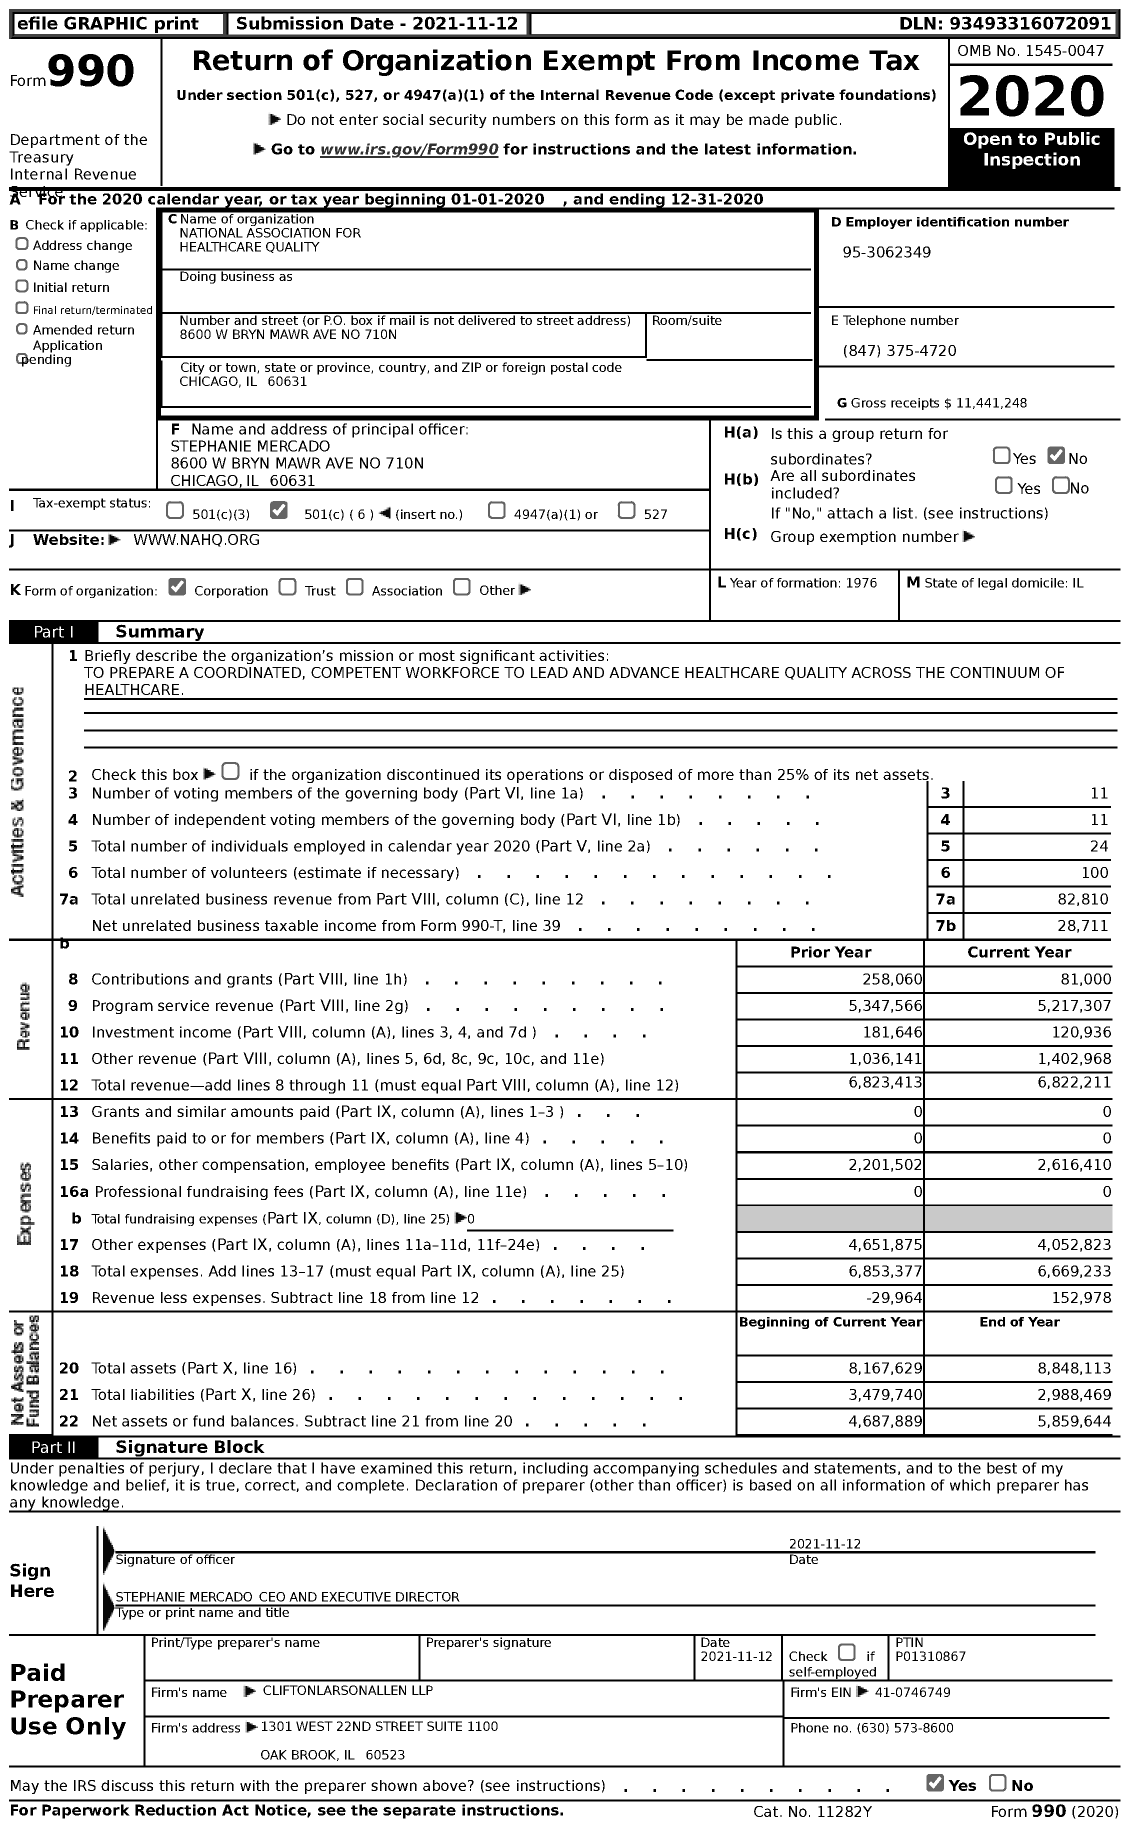 Image of first page of 2020 Form 990 for National Association for Healthcare Quality (NAHQ)